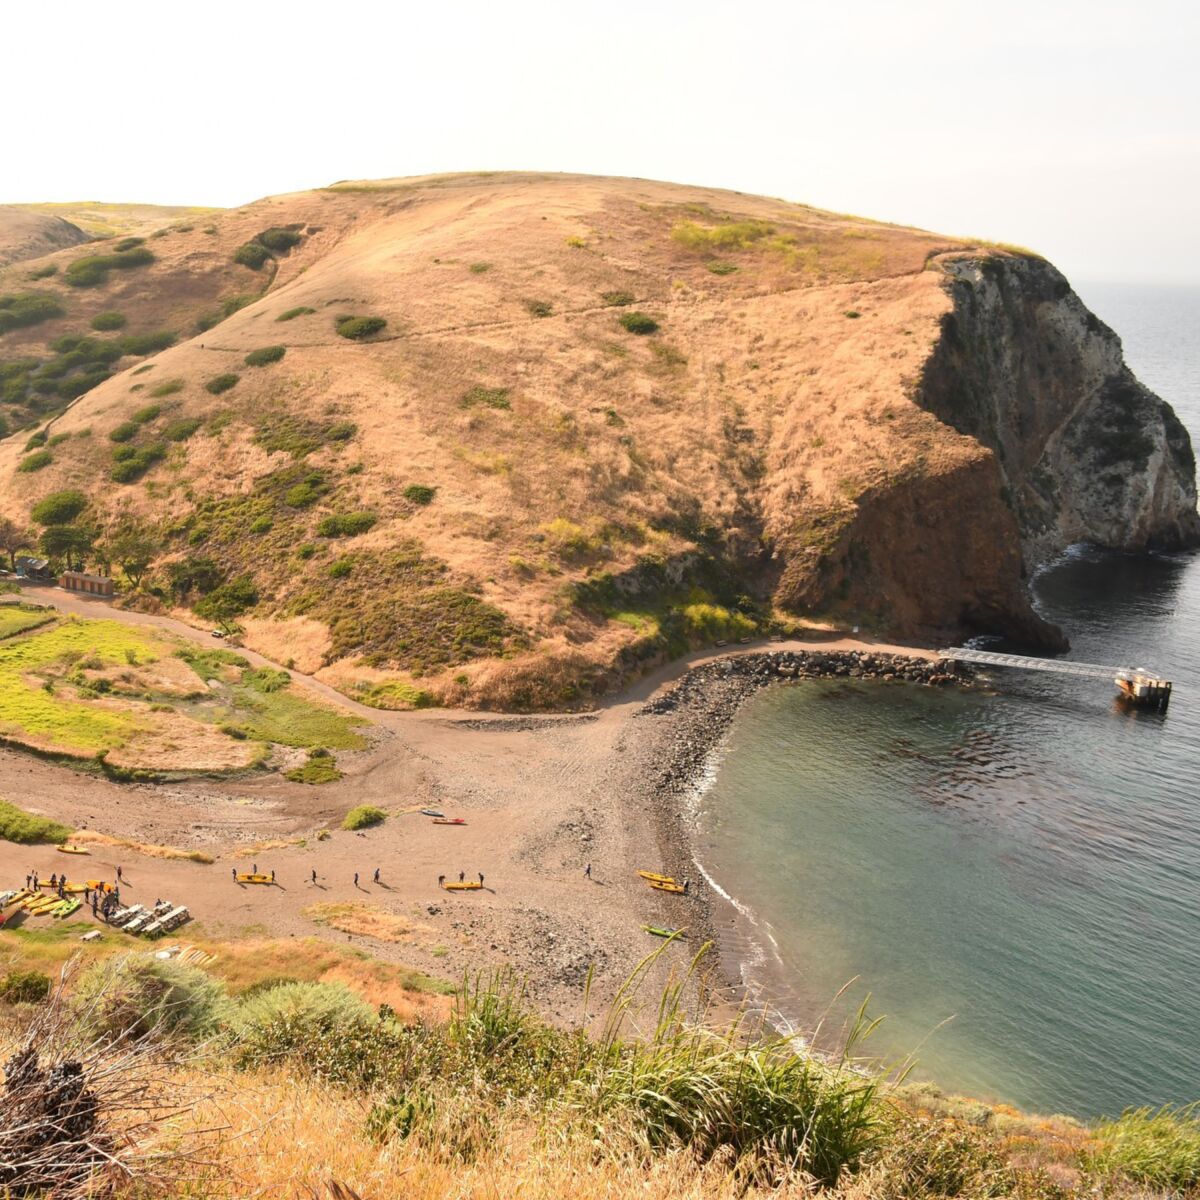 The old Scorpion Anchorage, the most popular landing spot on Santa Cruz Island in Channel Islands National Park.